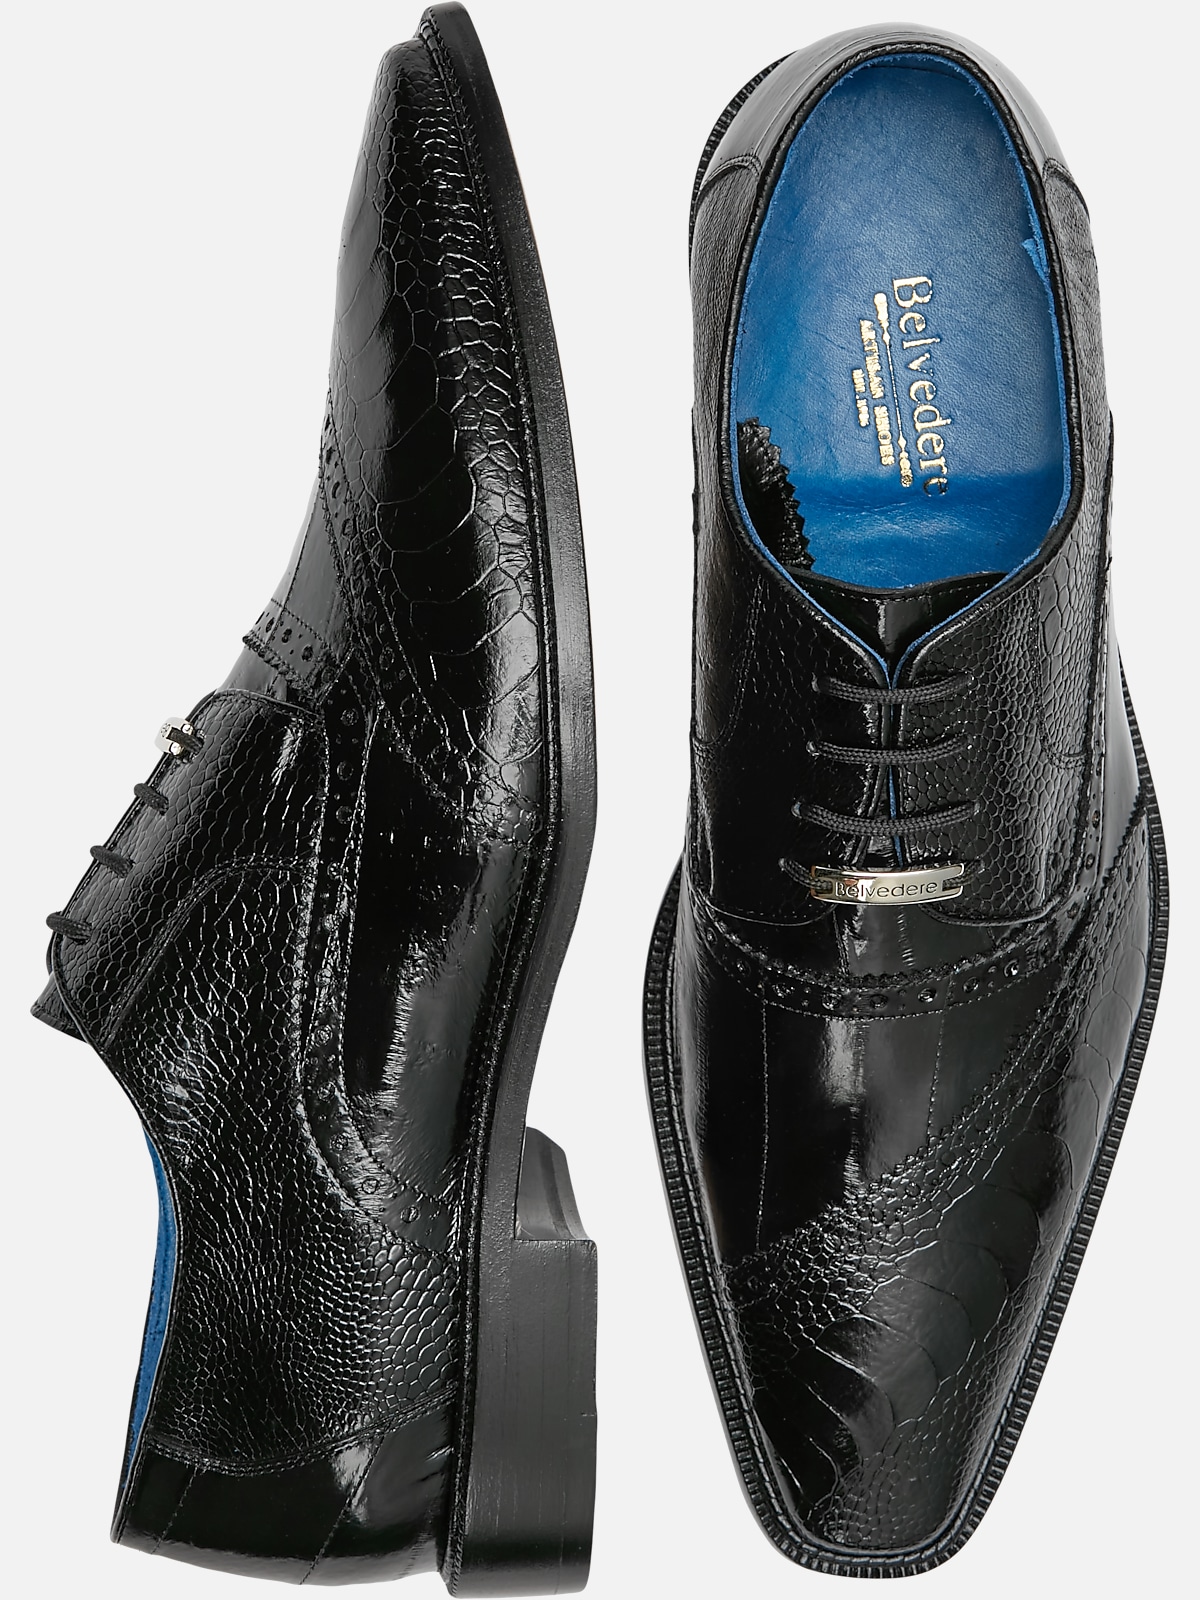 Belvedere Nino Ostrich & Eel Cap Toe Oxfords | All Clearance $39.99 ...